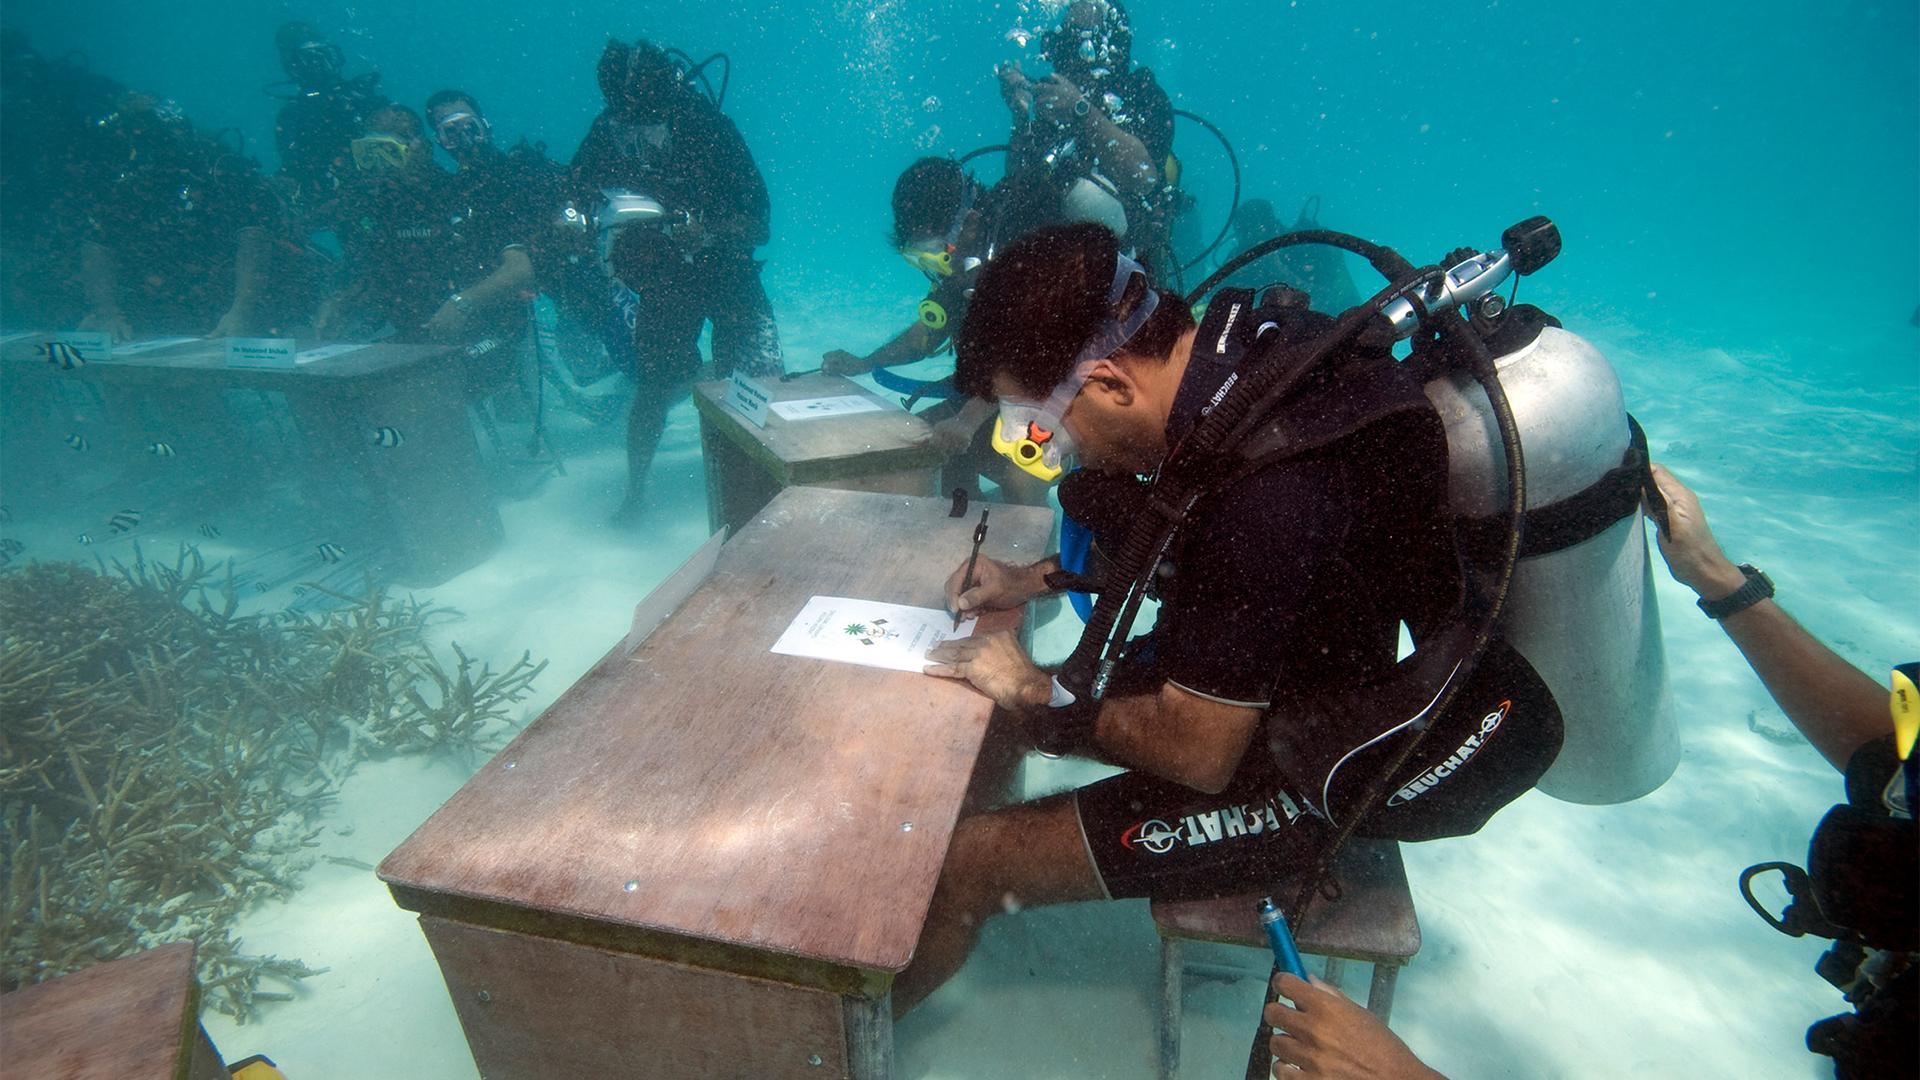 Maldivian President Mohammed Nasheed signs a document underwater calling on all countries to cut down their carbon dioxide emissions in Girifushi, about 20 minutes by speedboat from the capital Male, Maldives